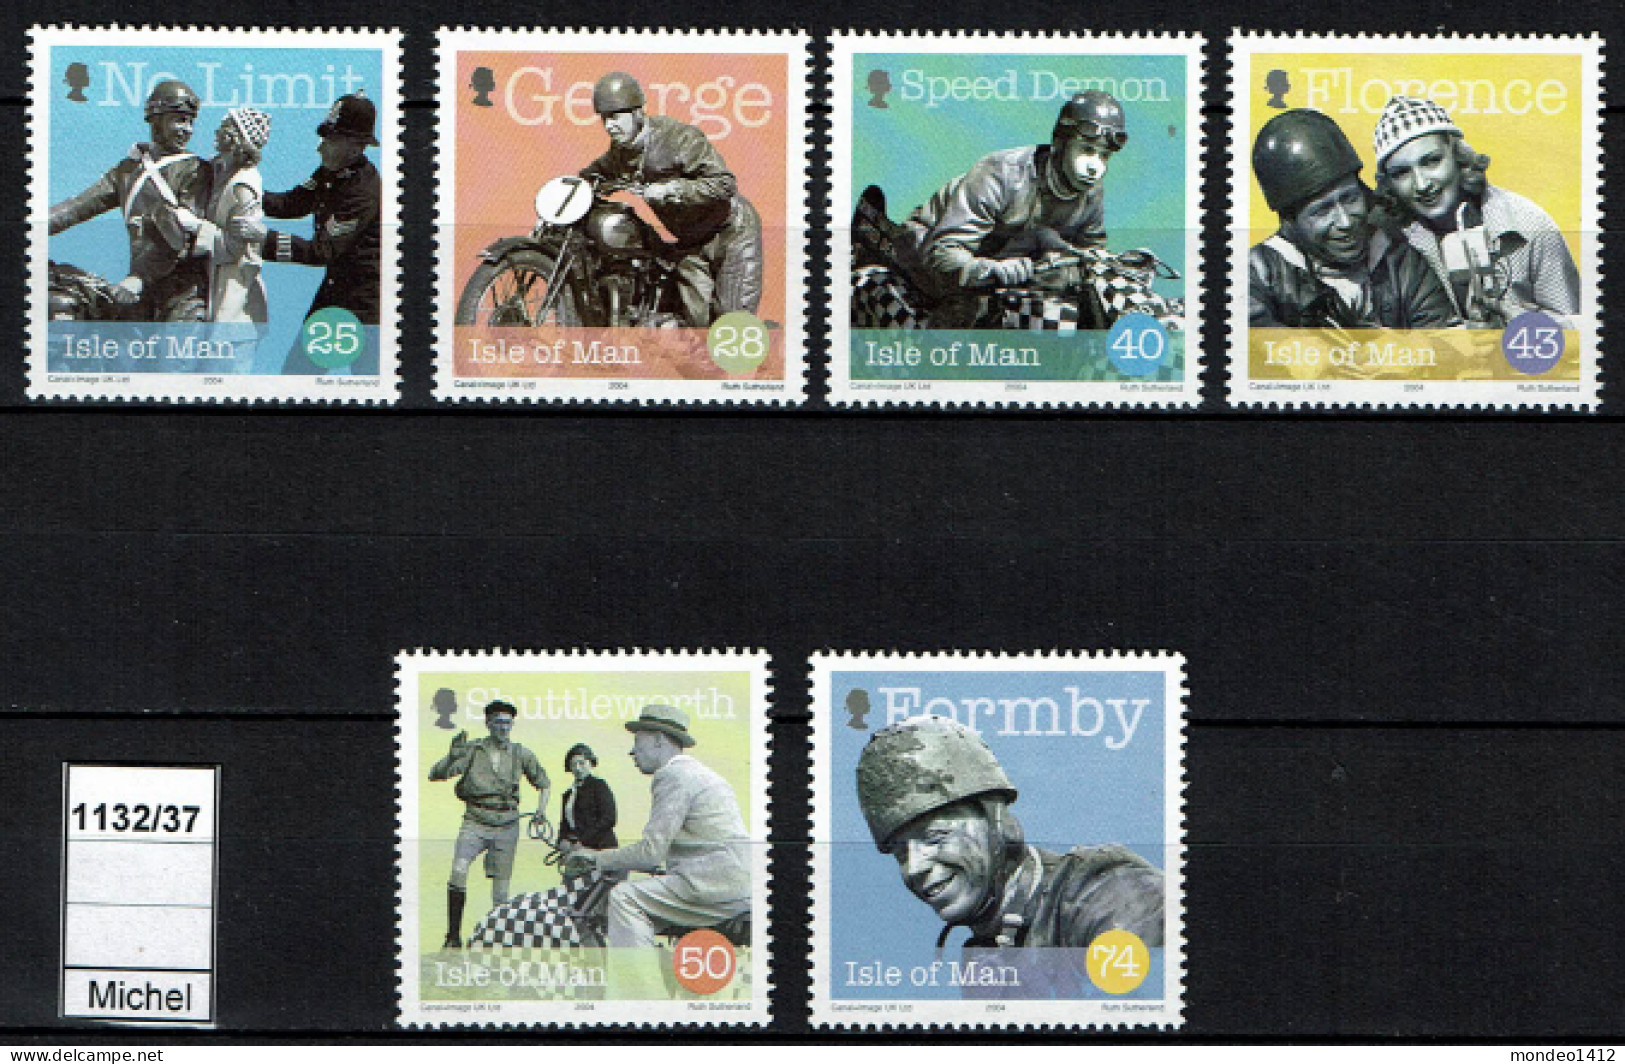 Isle Of Man - 2004 - MNH - Cinéma, Motorcycle, George Formby - English Actor, Singer-songwriter And Comedian - Isle Of Man